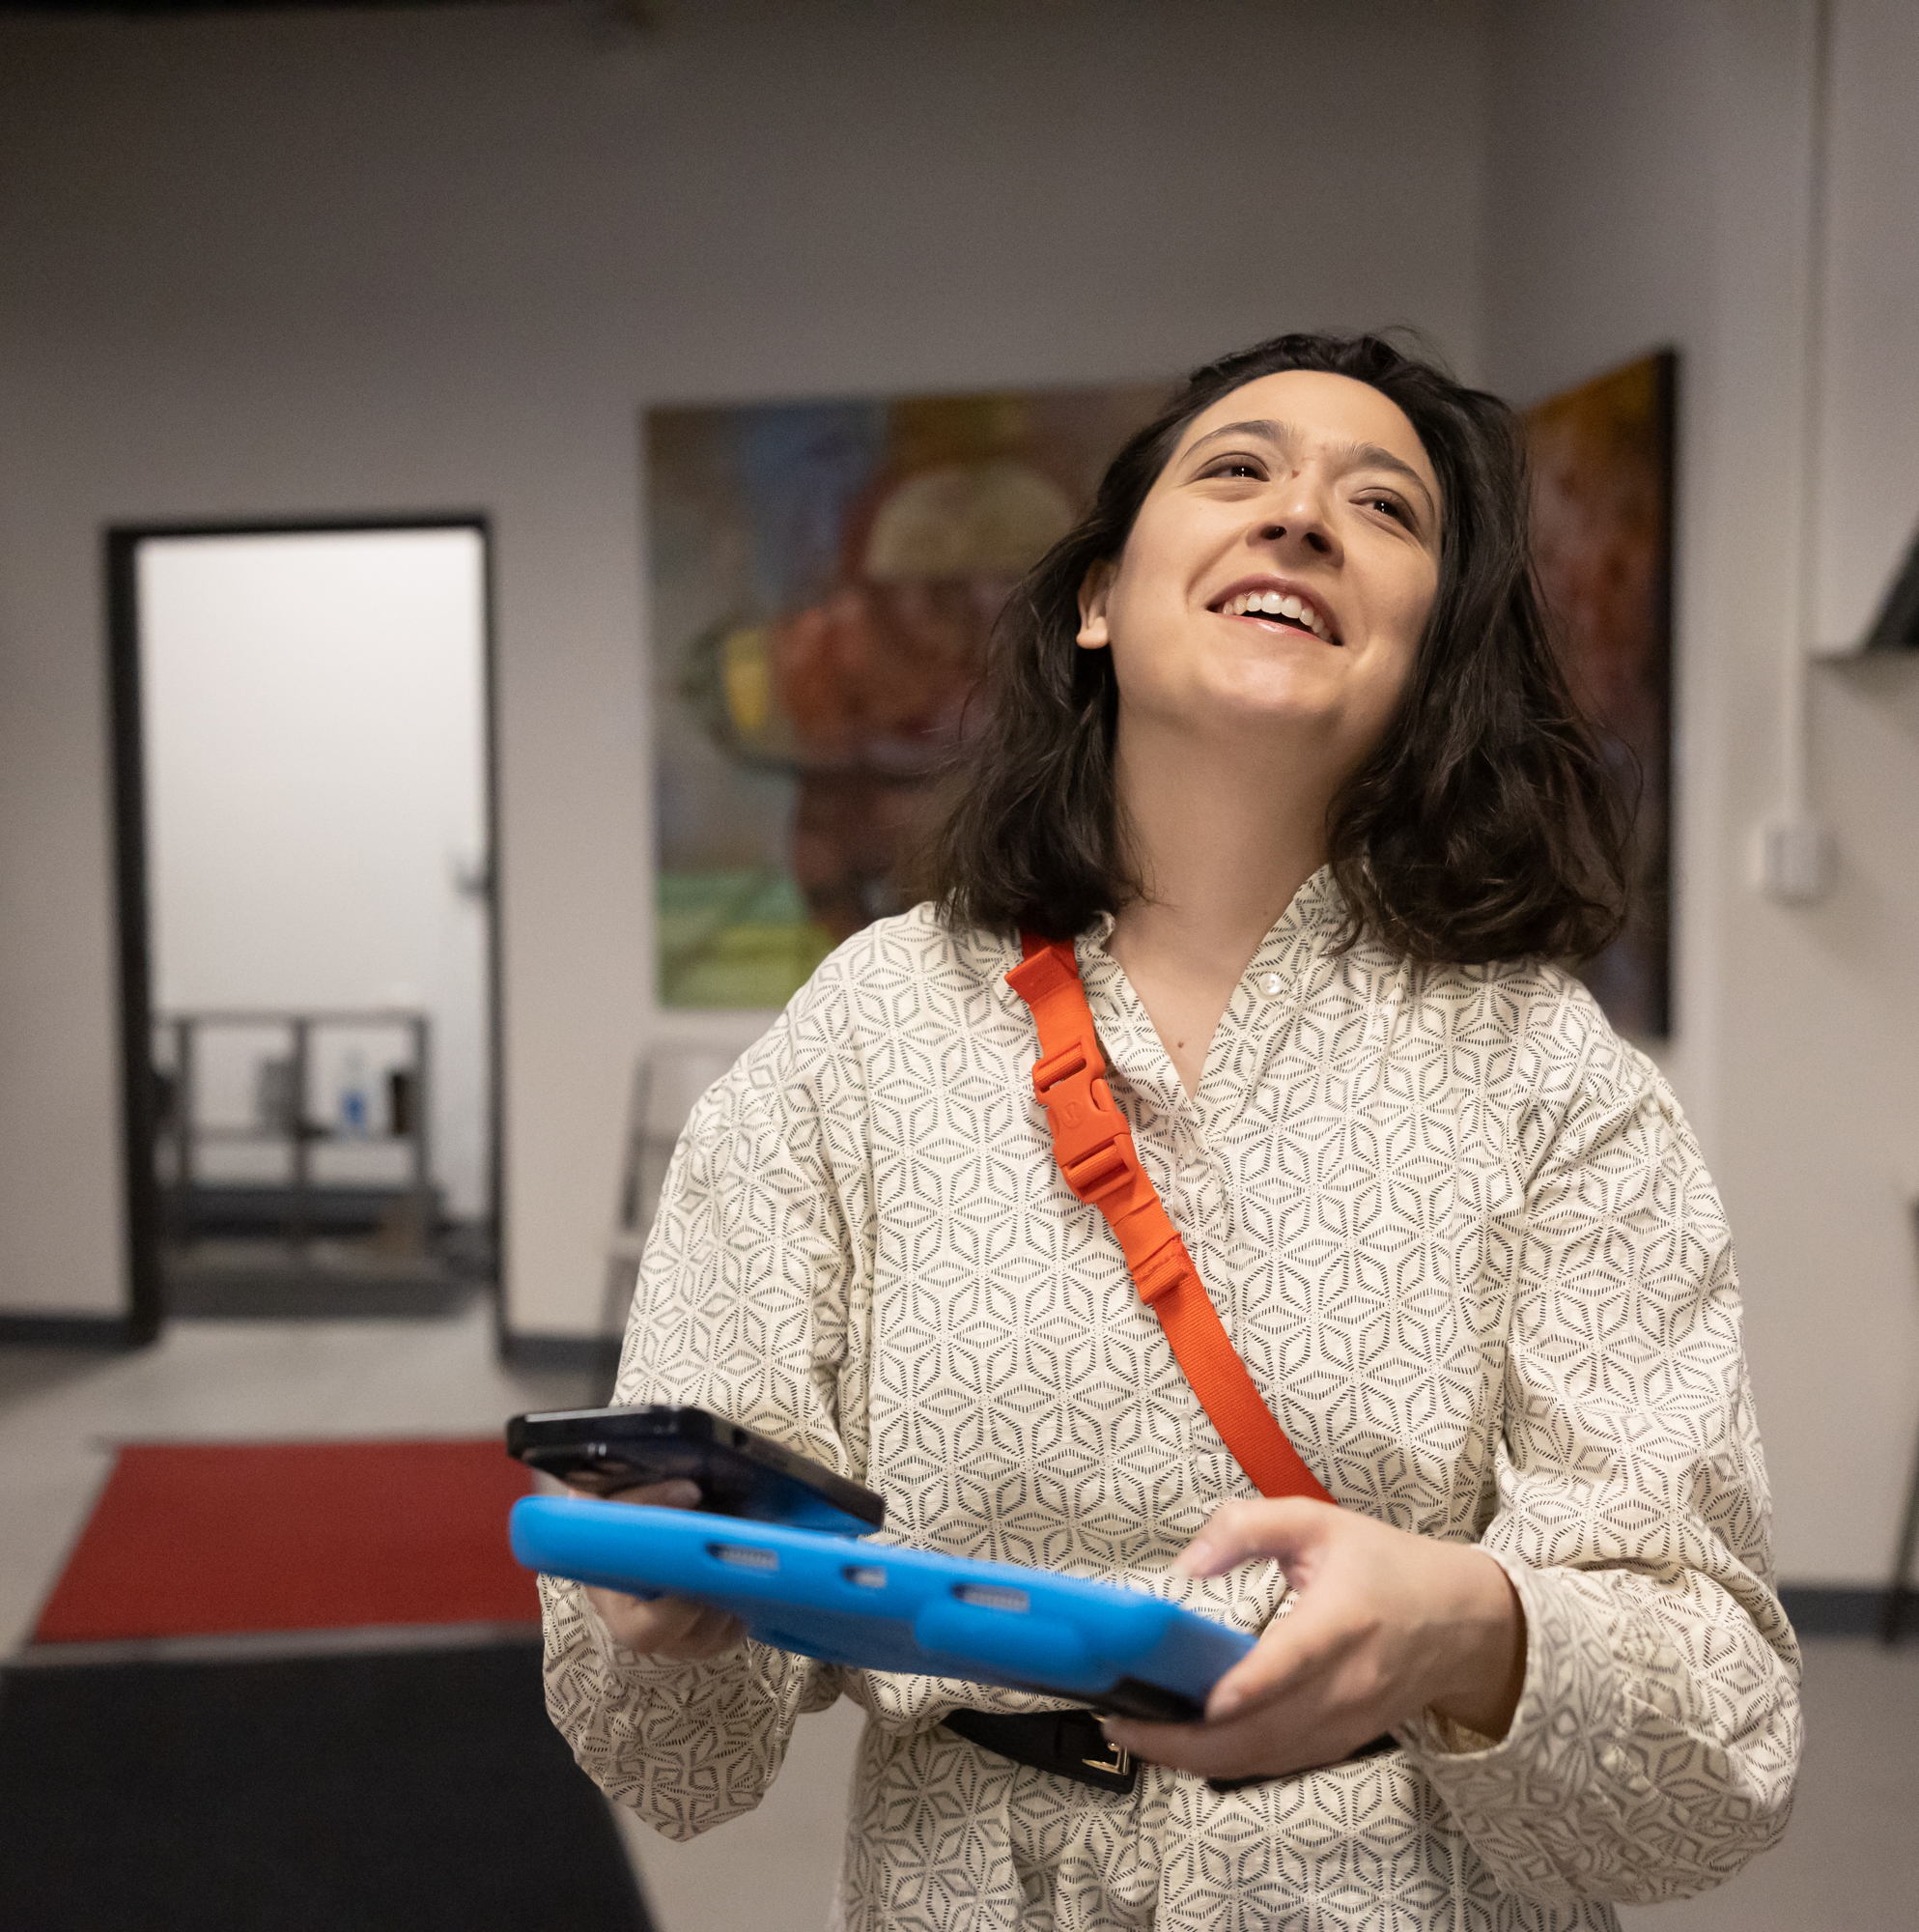 A smiling woman holds an iPad and stands in an indoor setting with artwork on the walls.